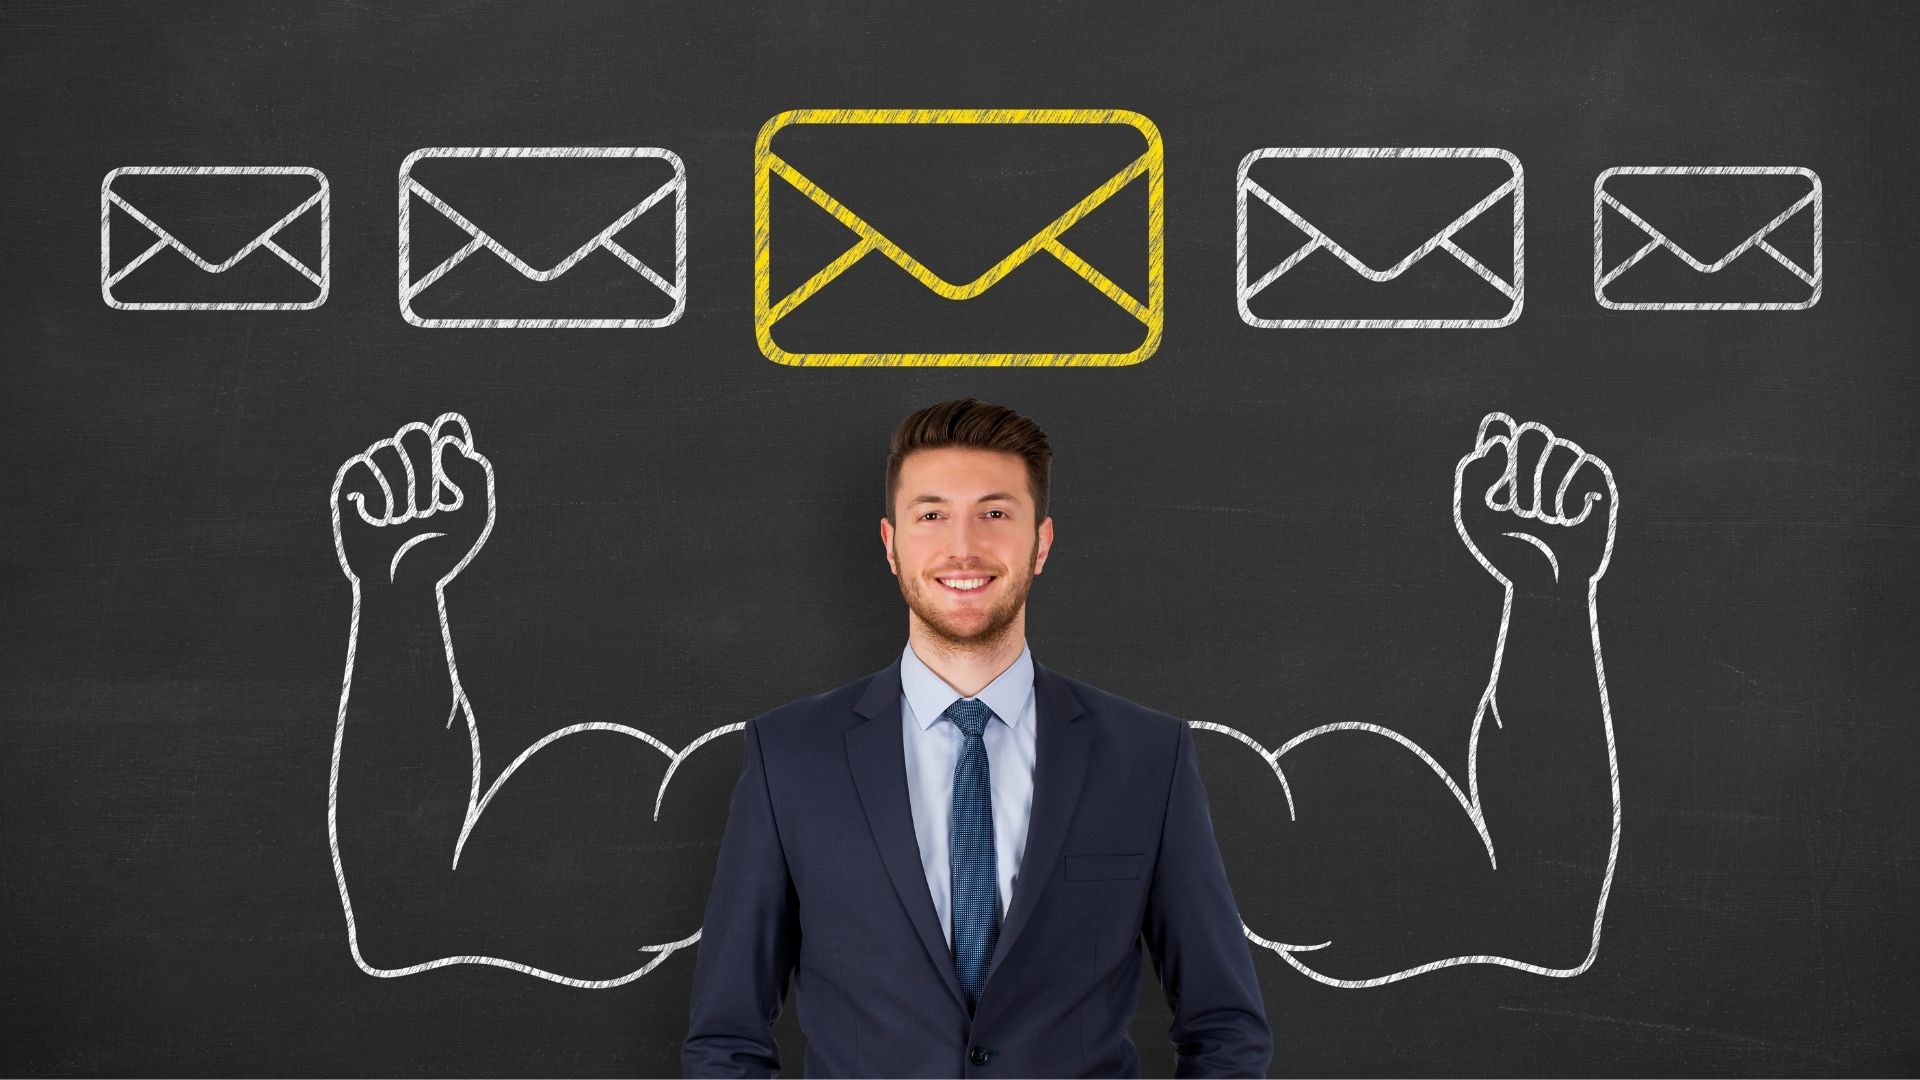 Email marketing gives your business extra muscle.